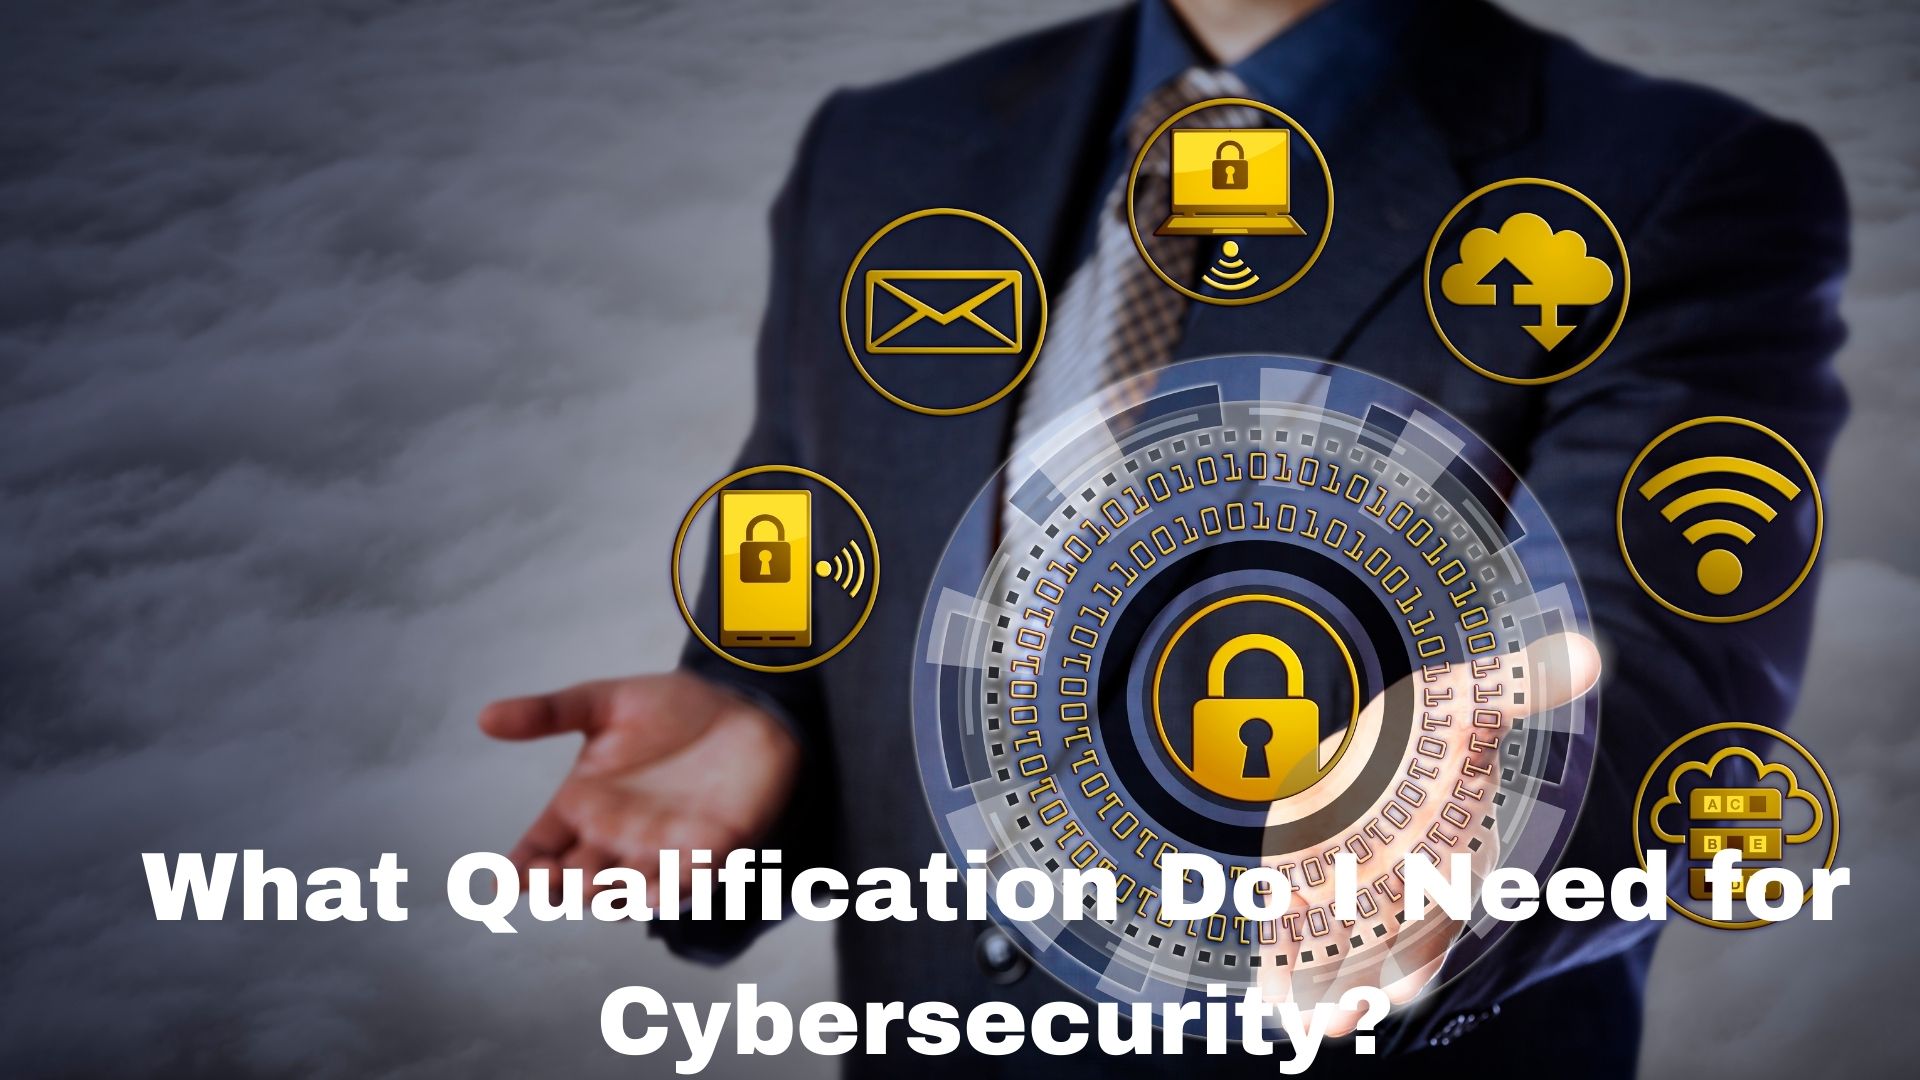 What Qualification Do I Need for Cybersecurity?